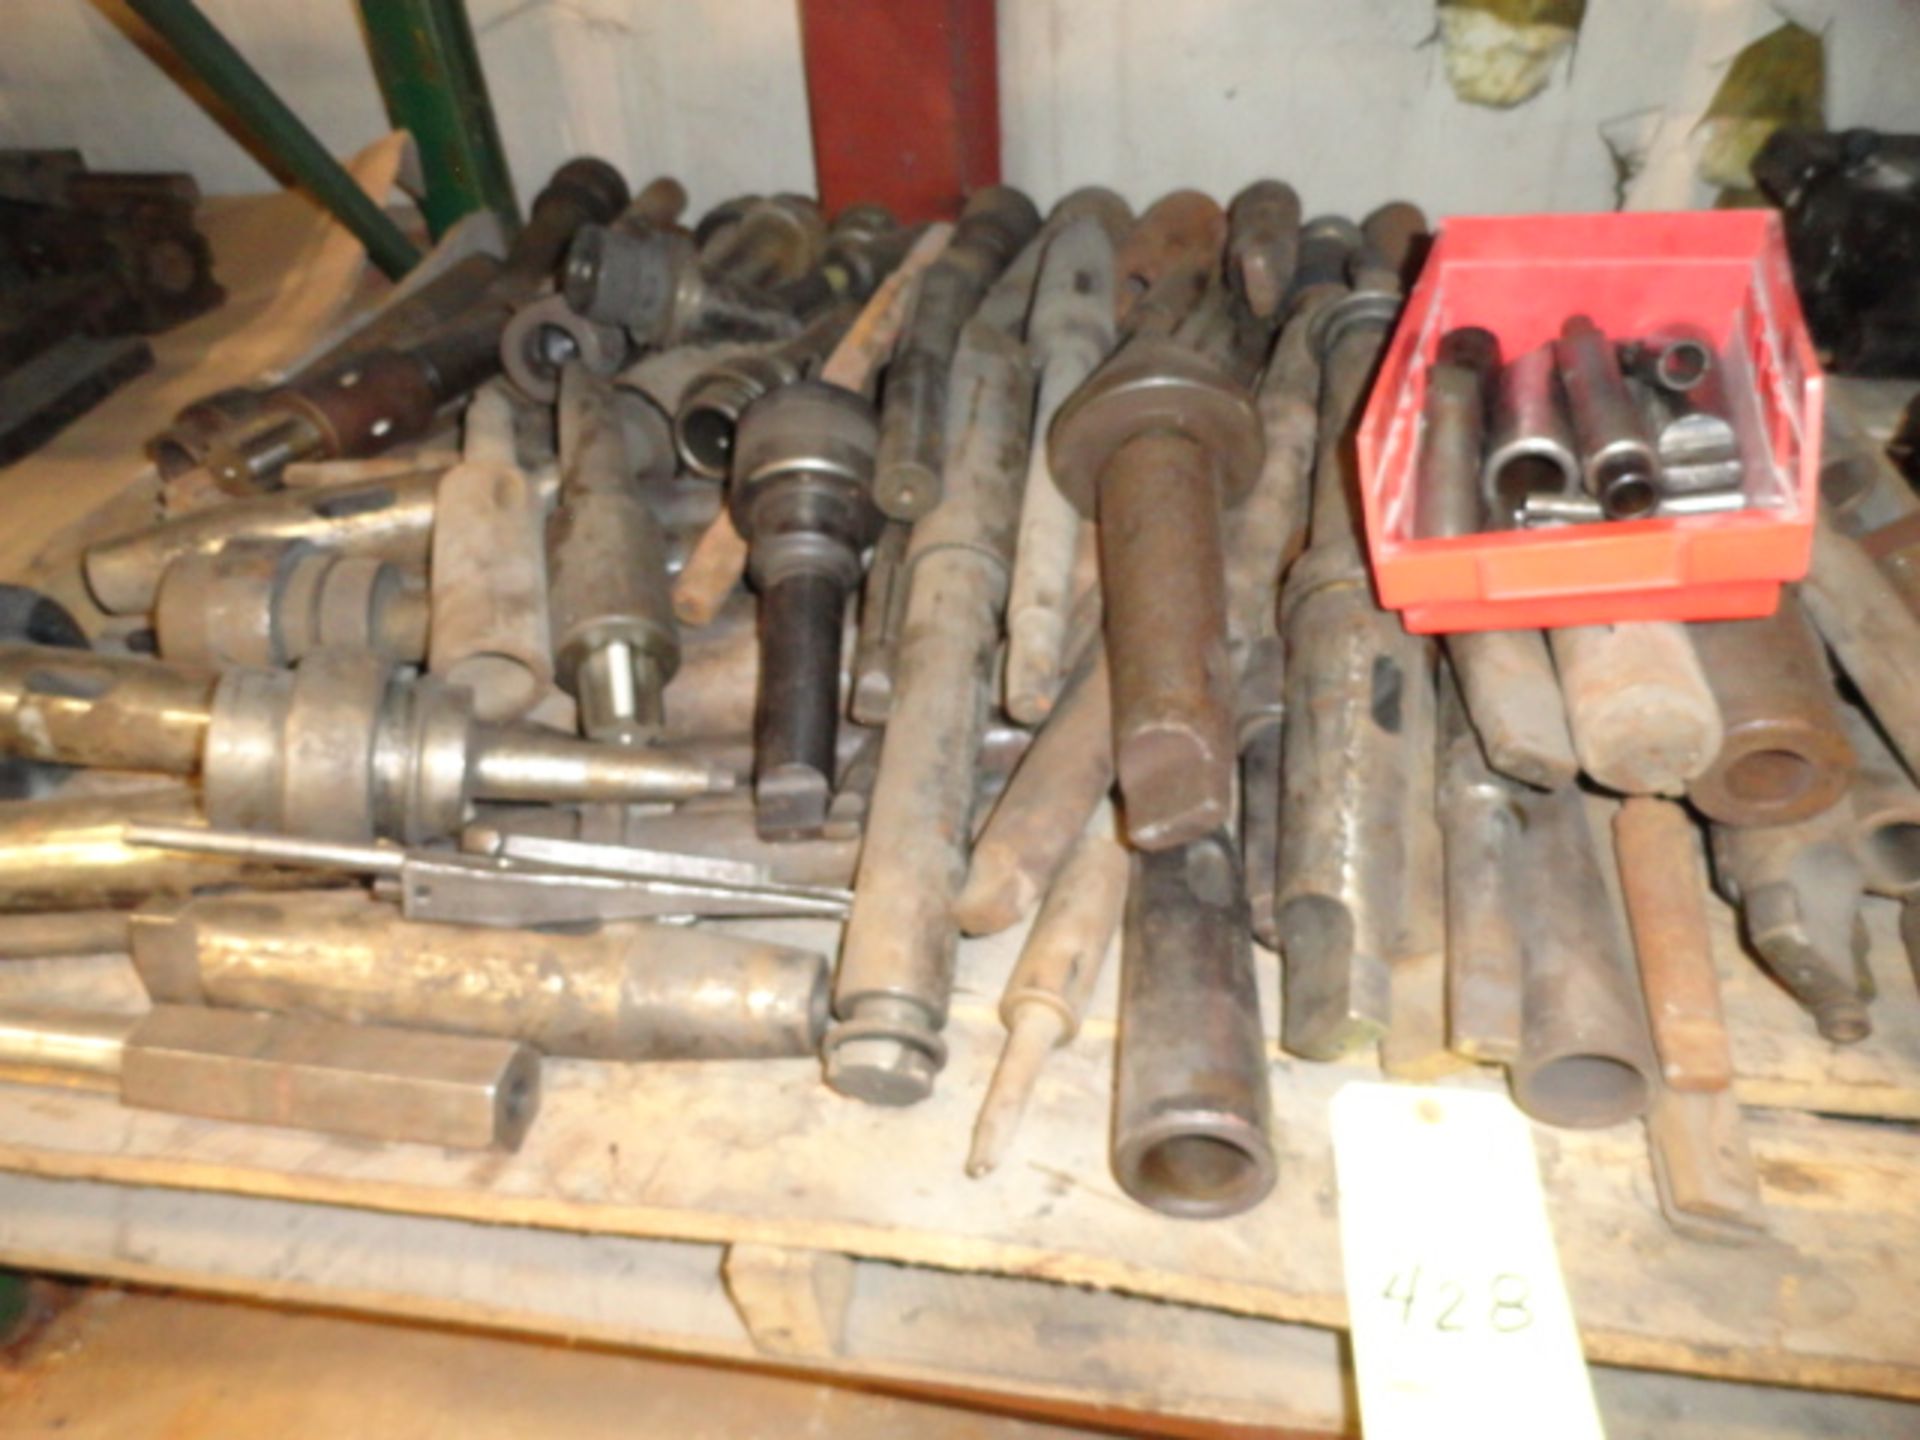 LOT OF MORSE TAPER TOOLING, misc.